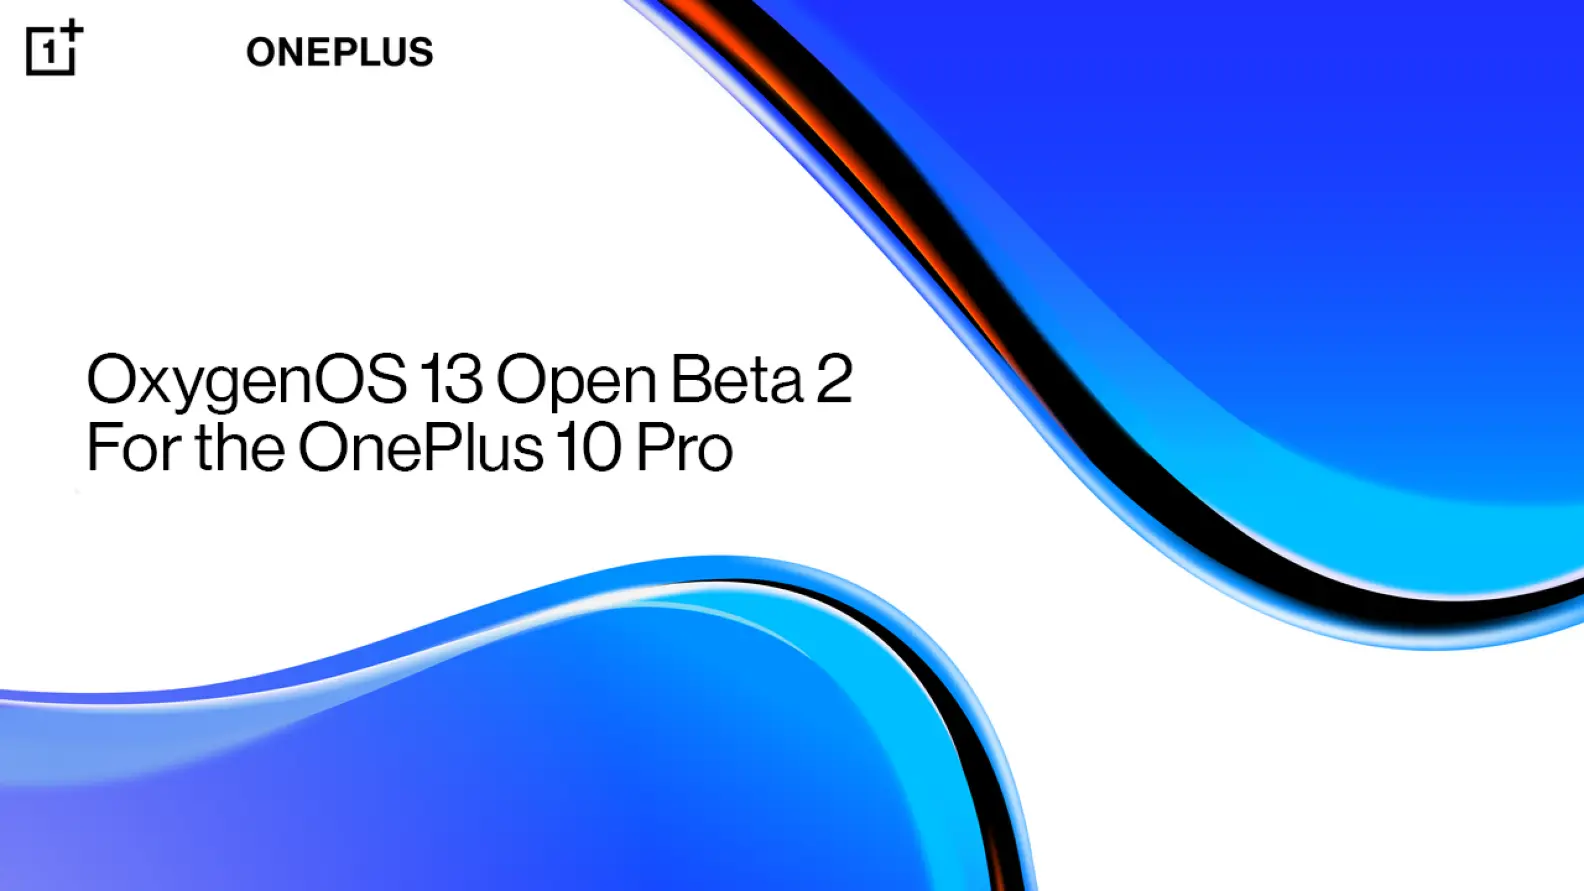 OxygenOS 13 Open Beta 2 for the OnePlus 10 Pro